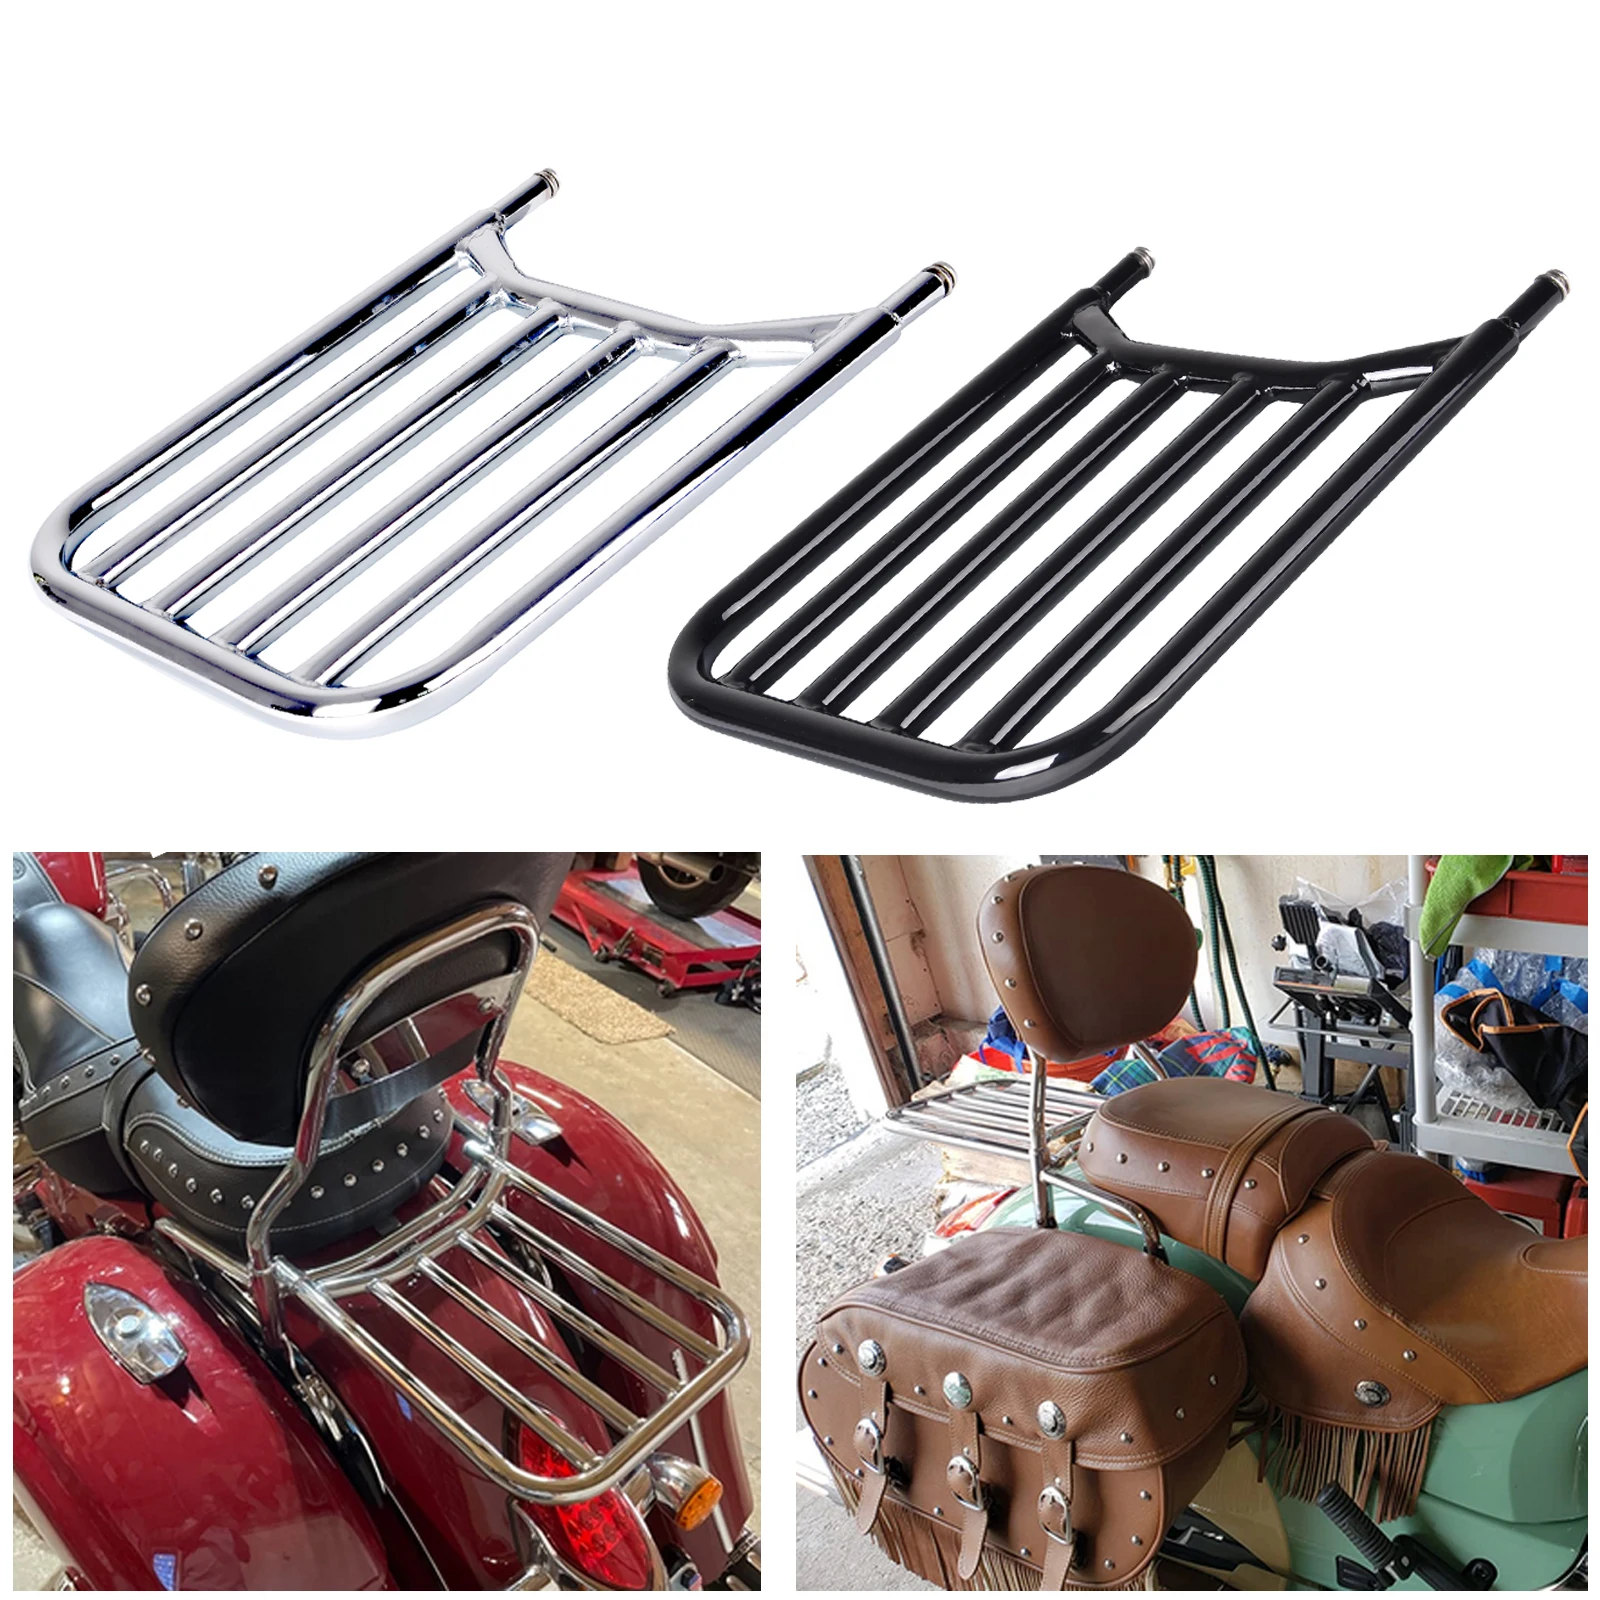 

Sissy Bar Backrest Luggage Rack Rear Cargo Carrier for Indian Chieftain Chief Springfield Dark Horse Classic Vintage 2014-2022